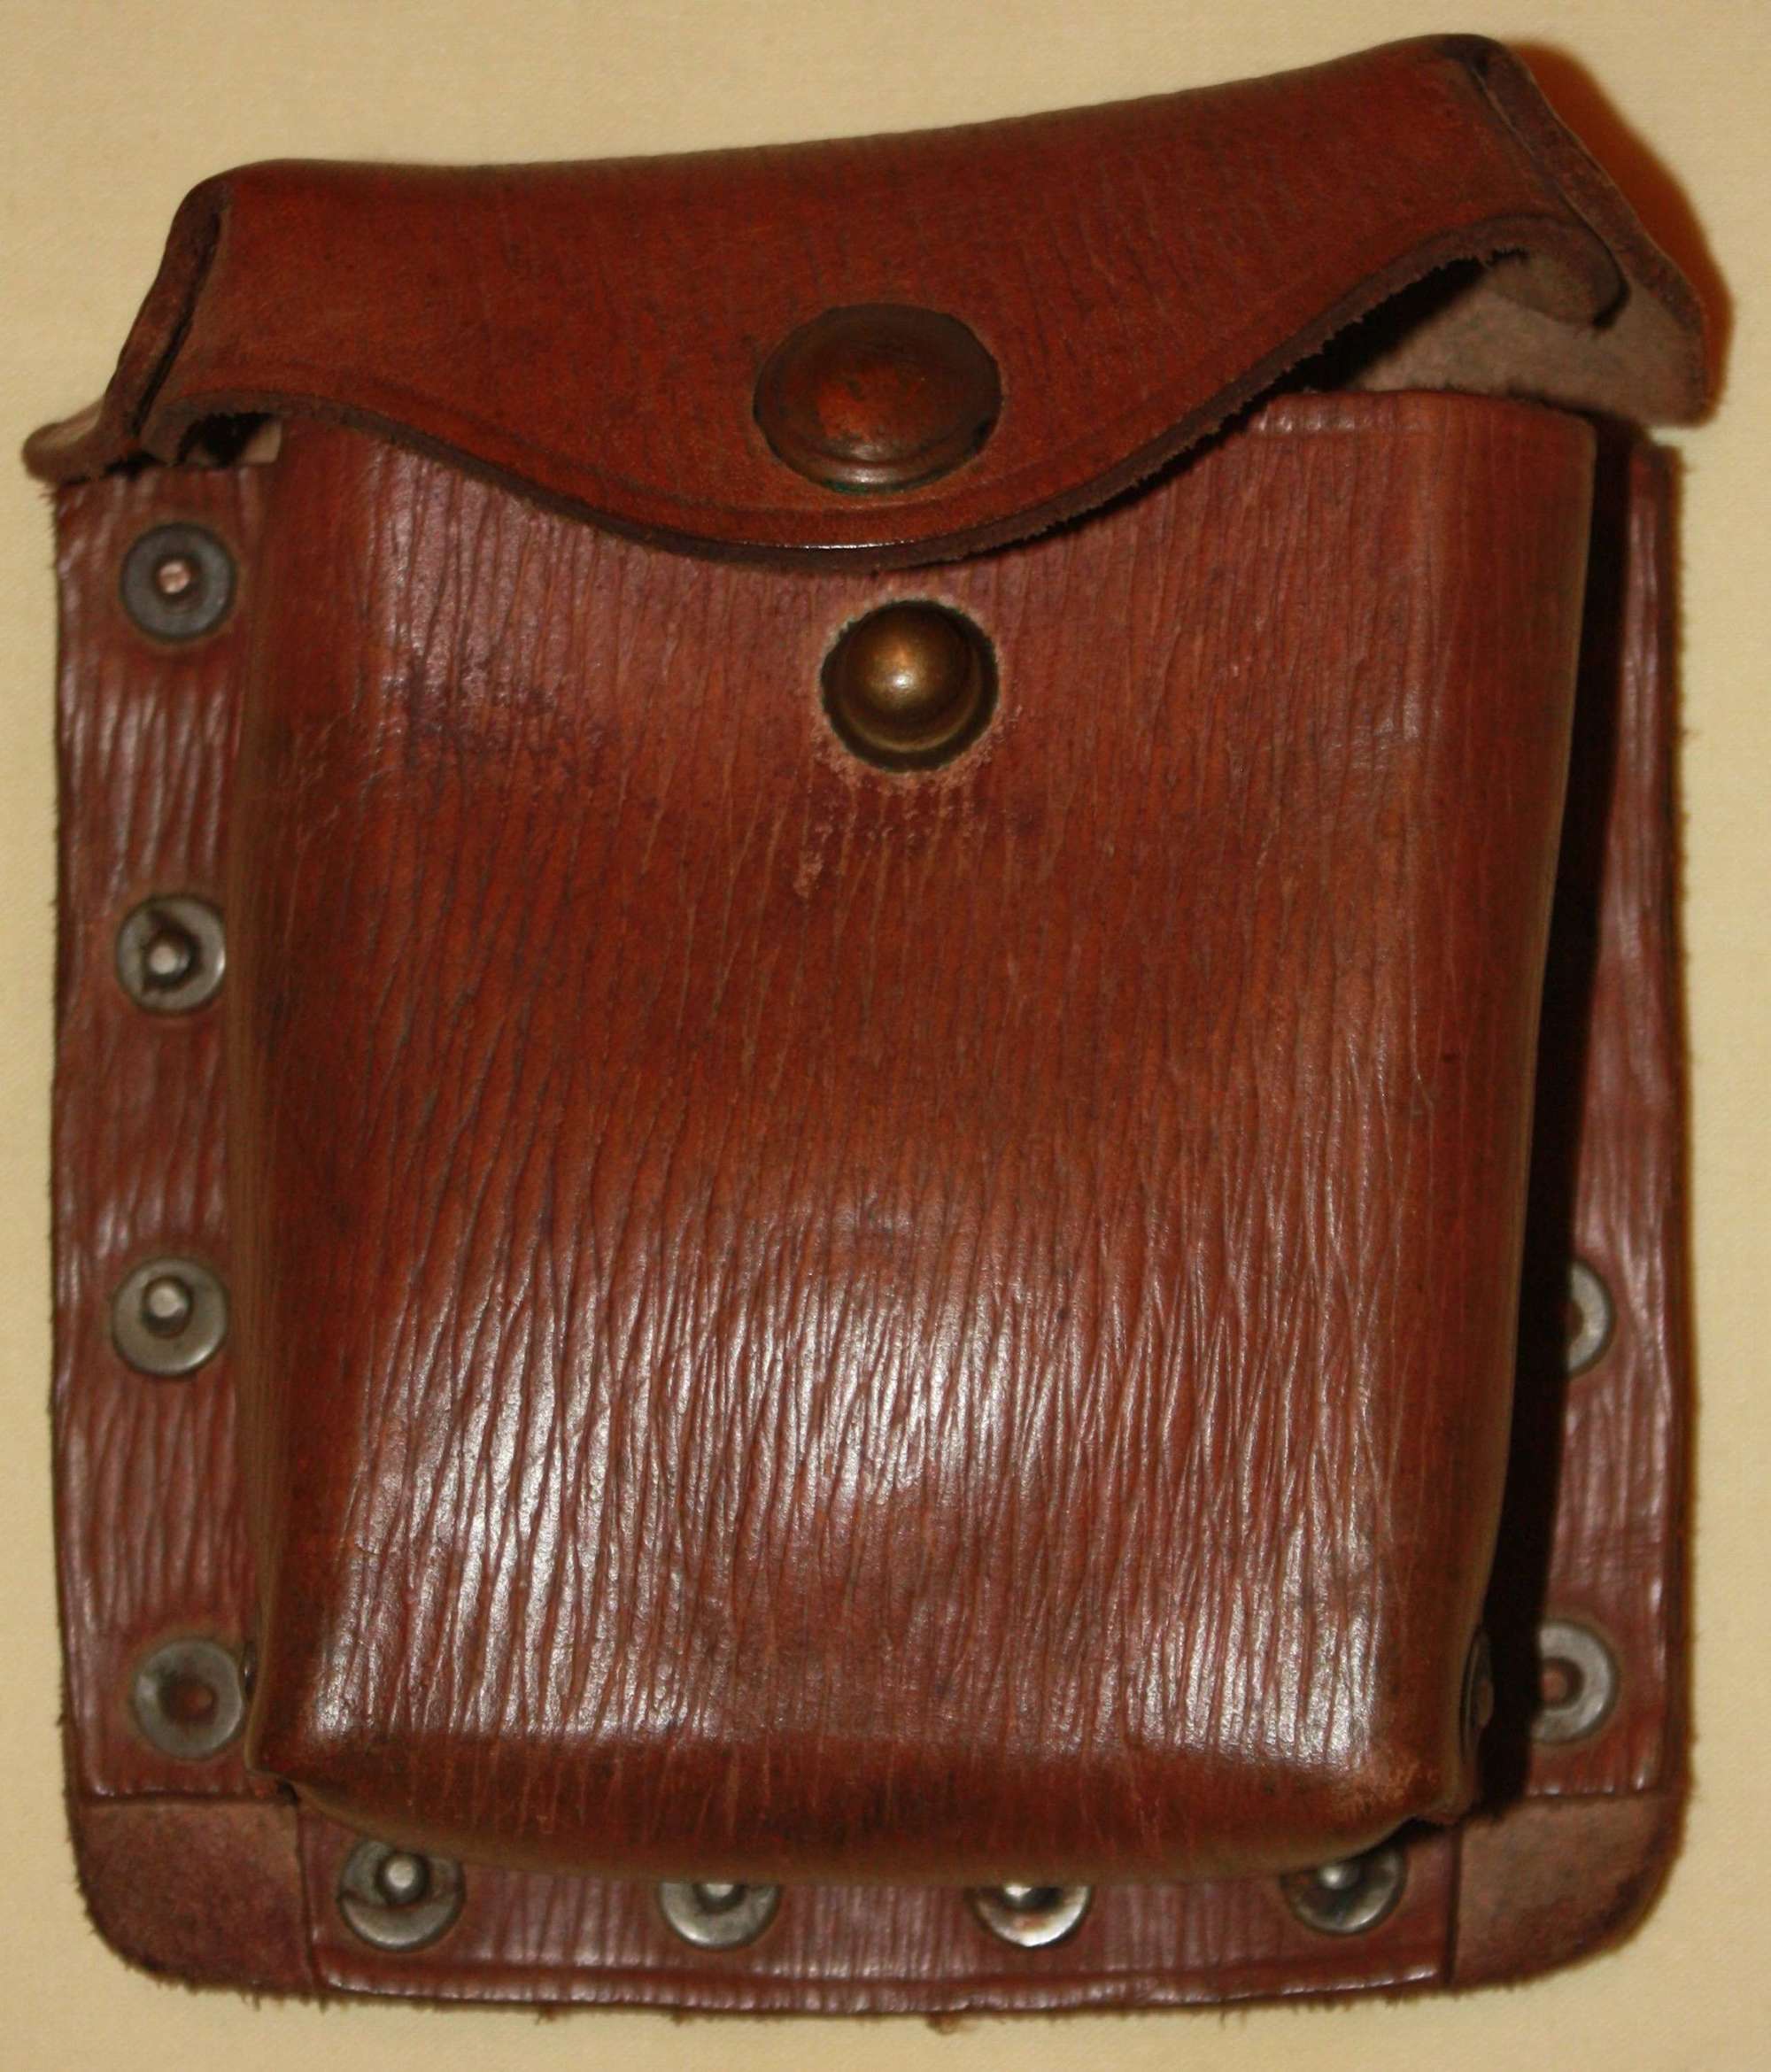 A 1941 DATED 39 PATTERN LEATHER EQUIPMENT PISTOL AMMO POUCH